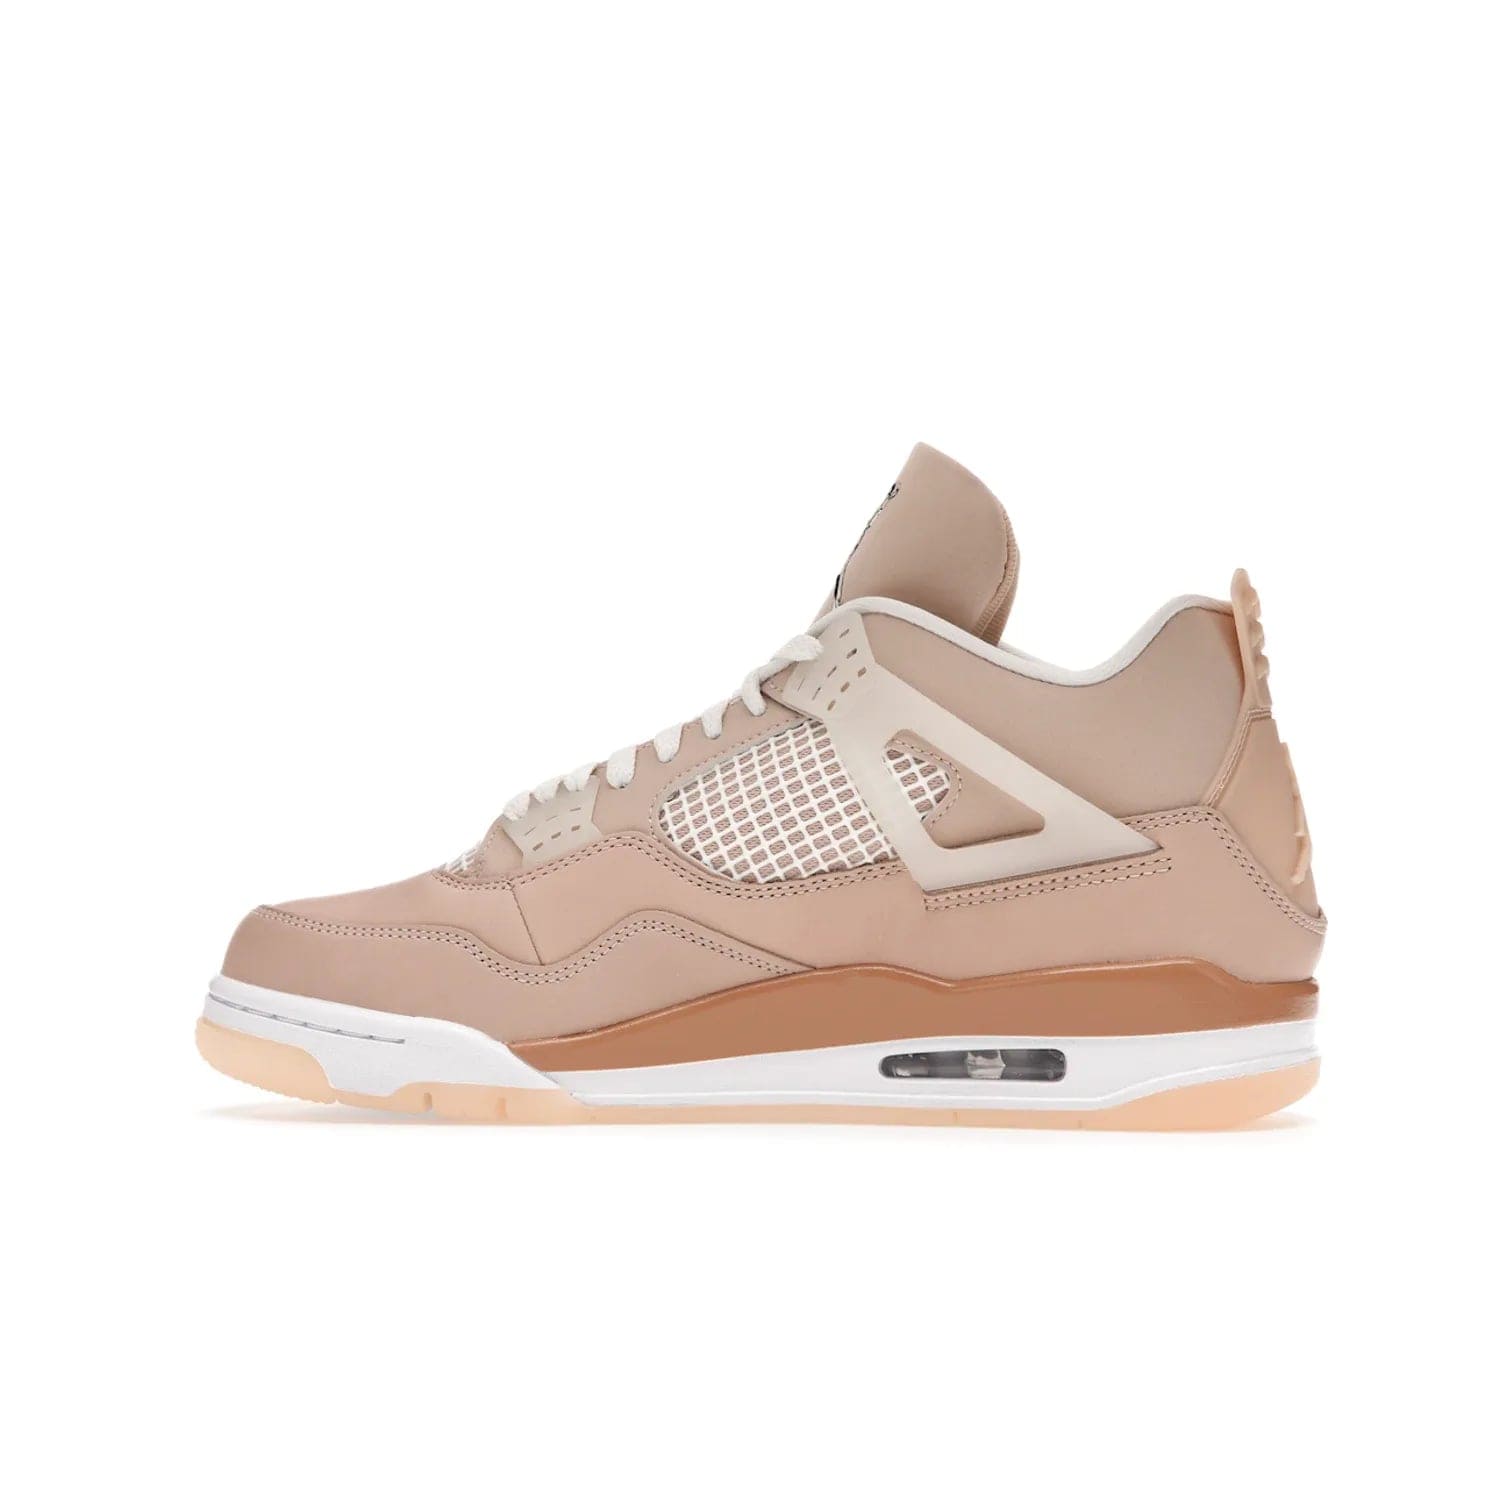 Jordan 4 Retro Shimmer (Women's) - Image 20 - Only at www.BallersClubKickz.com - Air Jordan 4 Shimmer (W): A women's-exclusive design with a buttery beige upper and Silver/Orange Bronze details. Durabuck and metallic Jumpman branding elevate the iconic silhouette. Shop now.